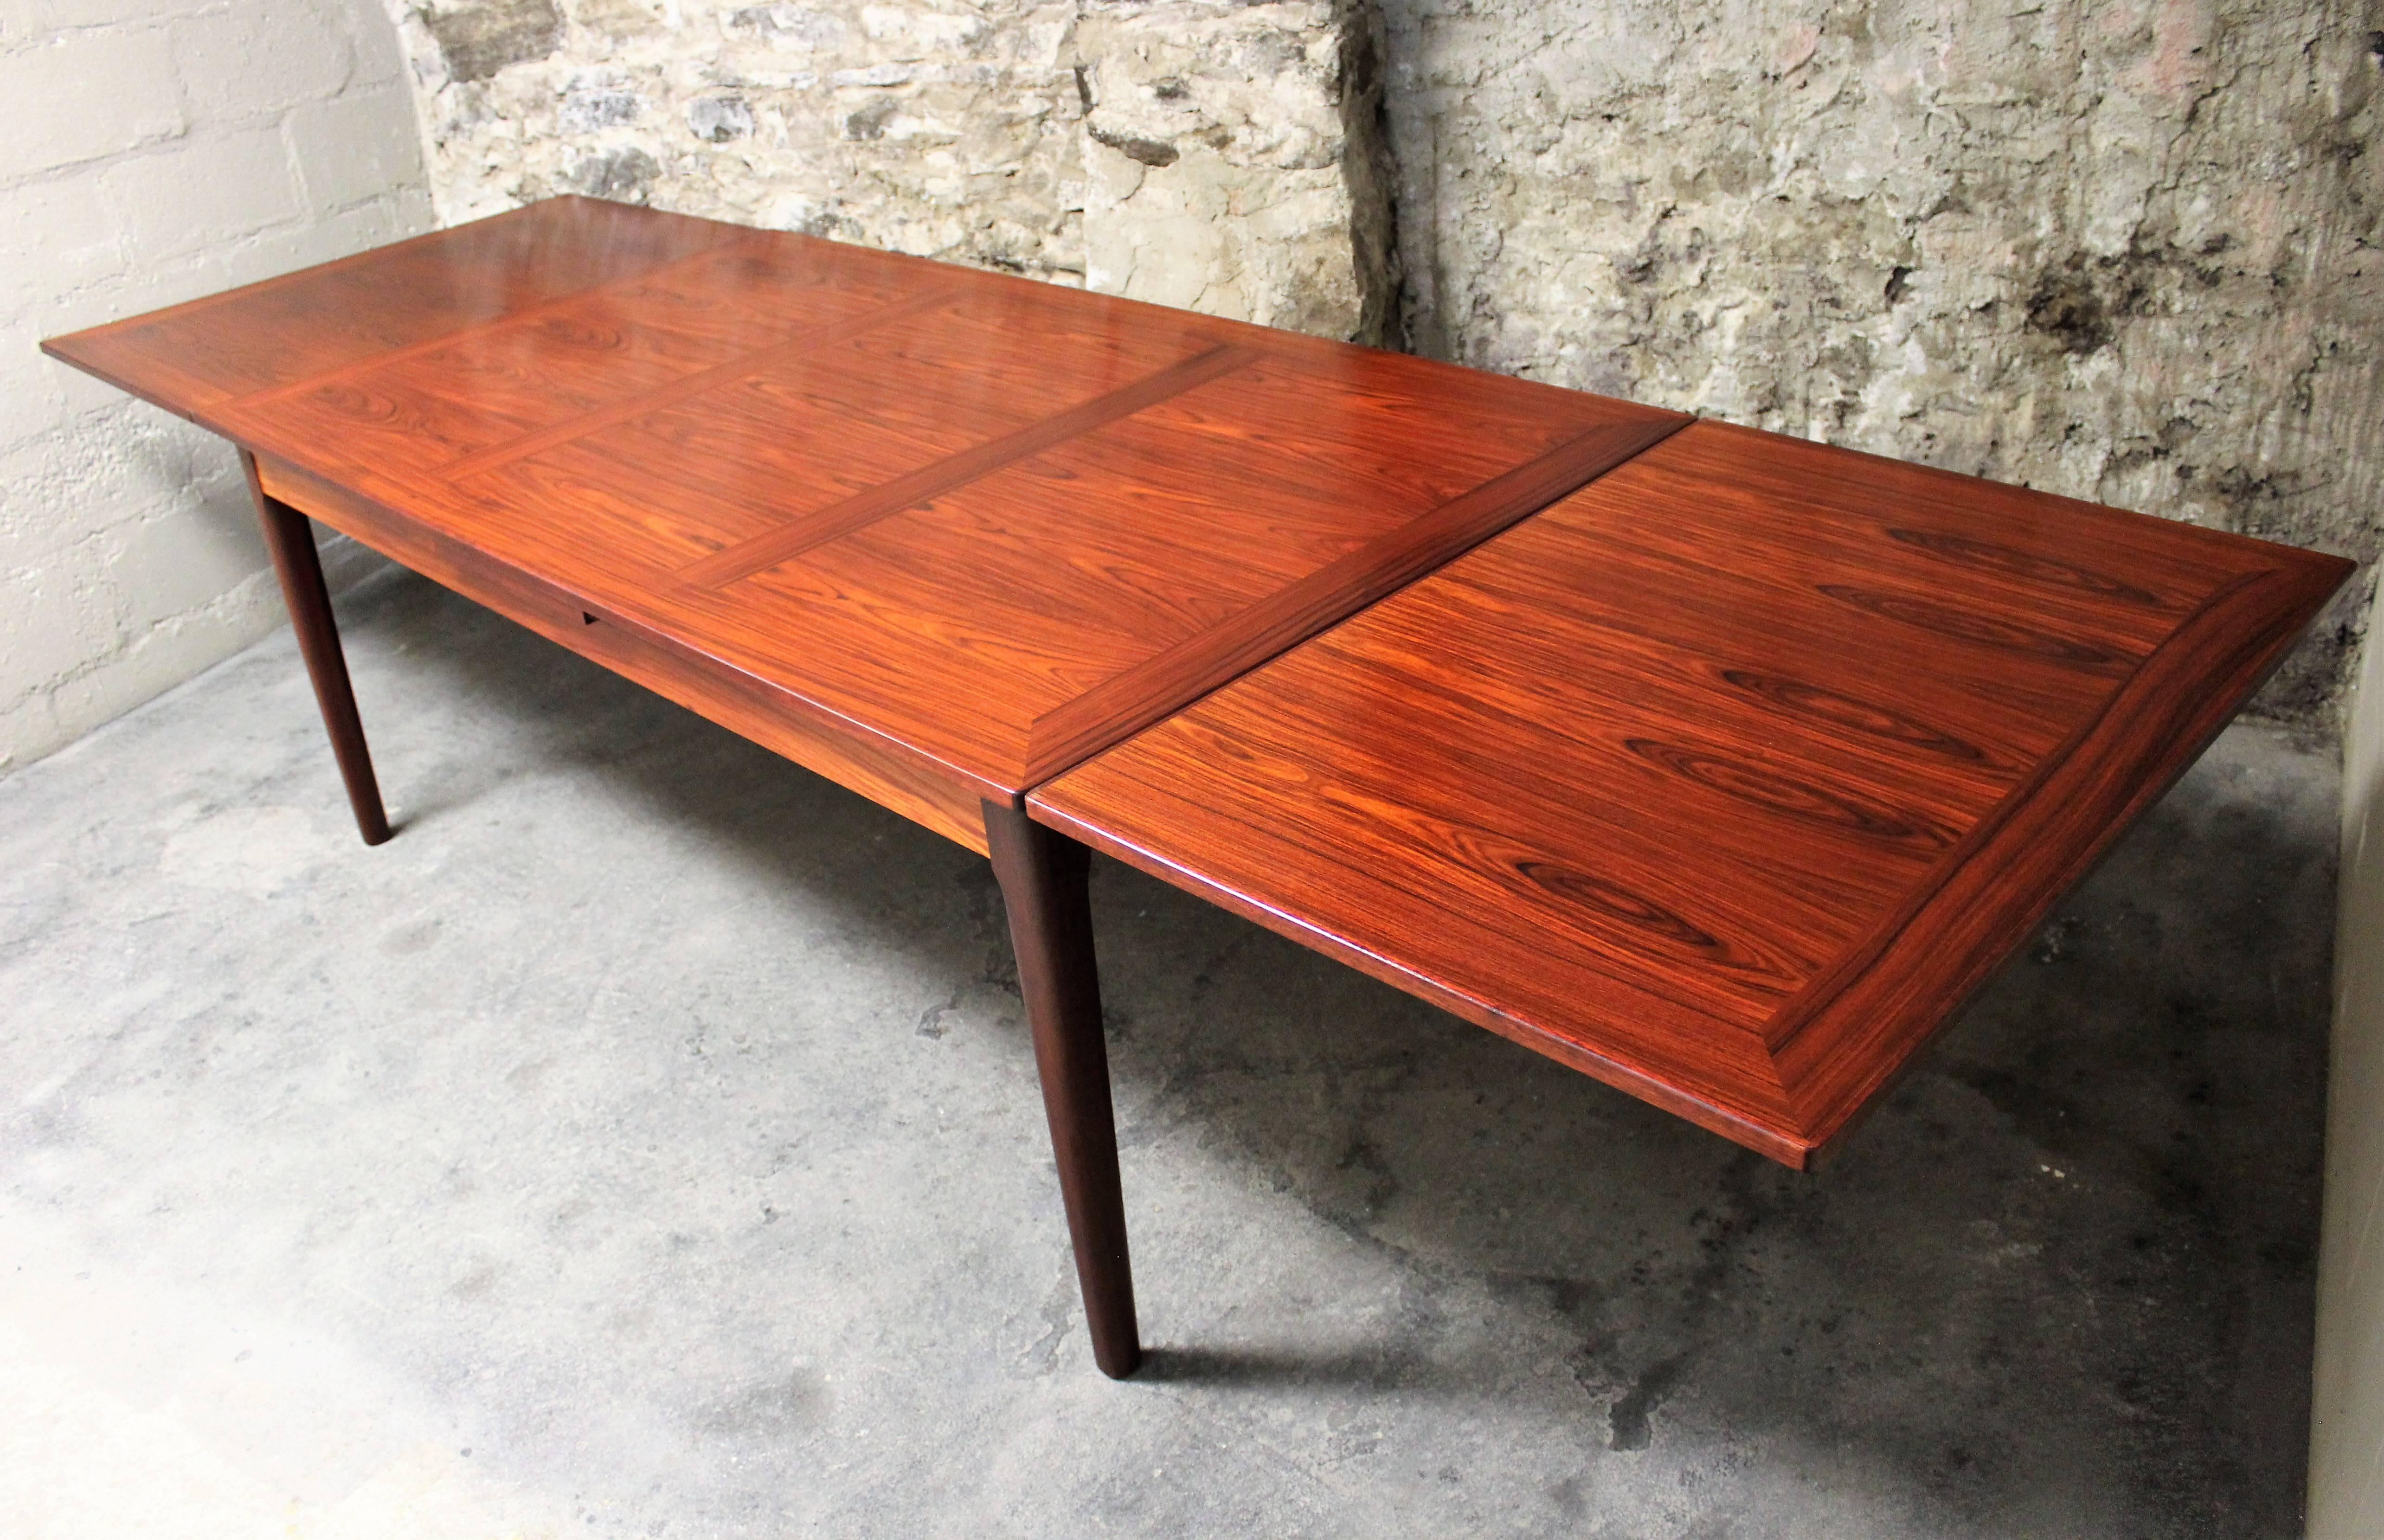 Scandinavian Modern Large Danish Dining Room or Conference Table by Skovby